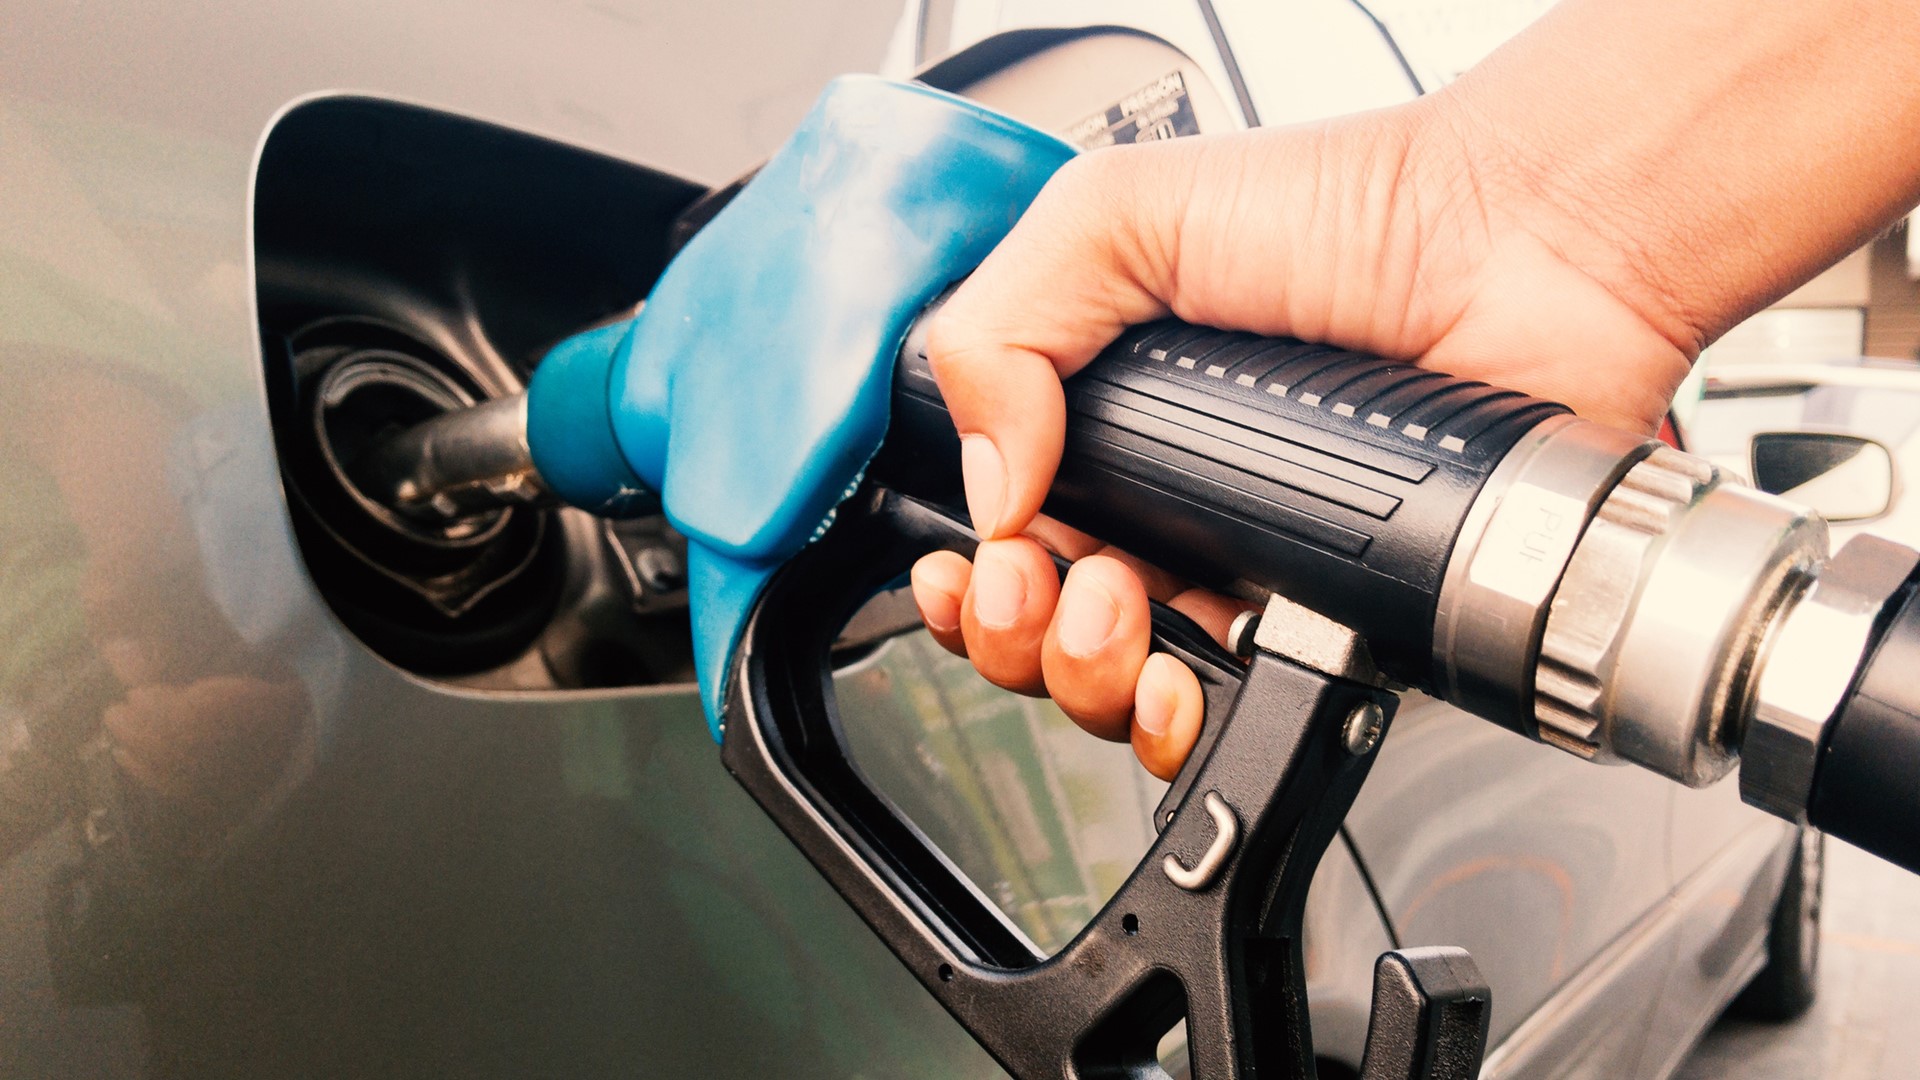 Experts say gas prices should decrease by 13 cents a gallon.